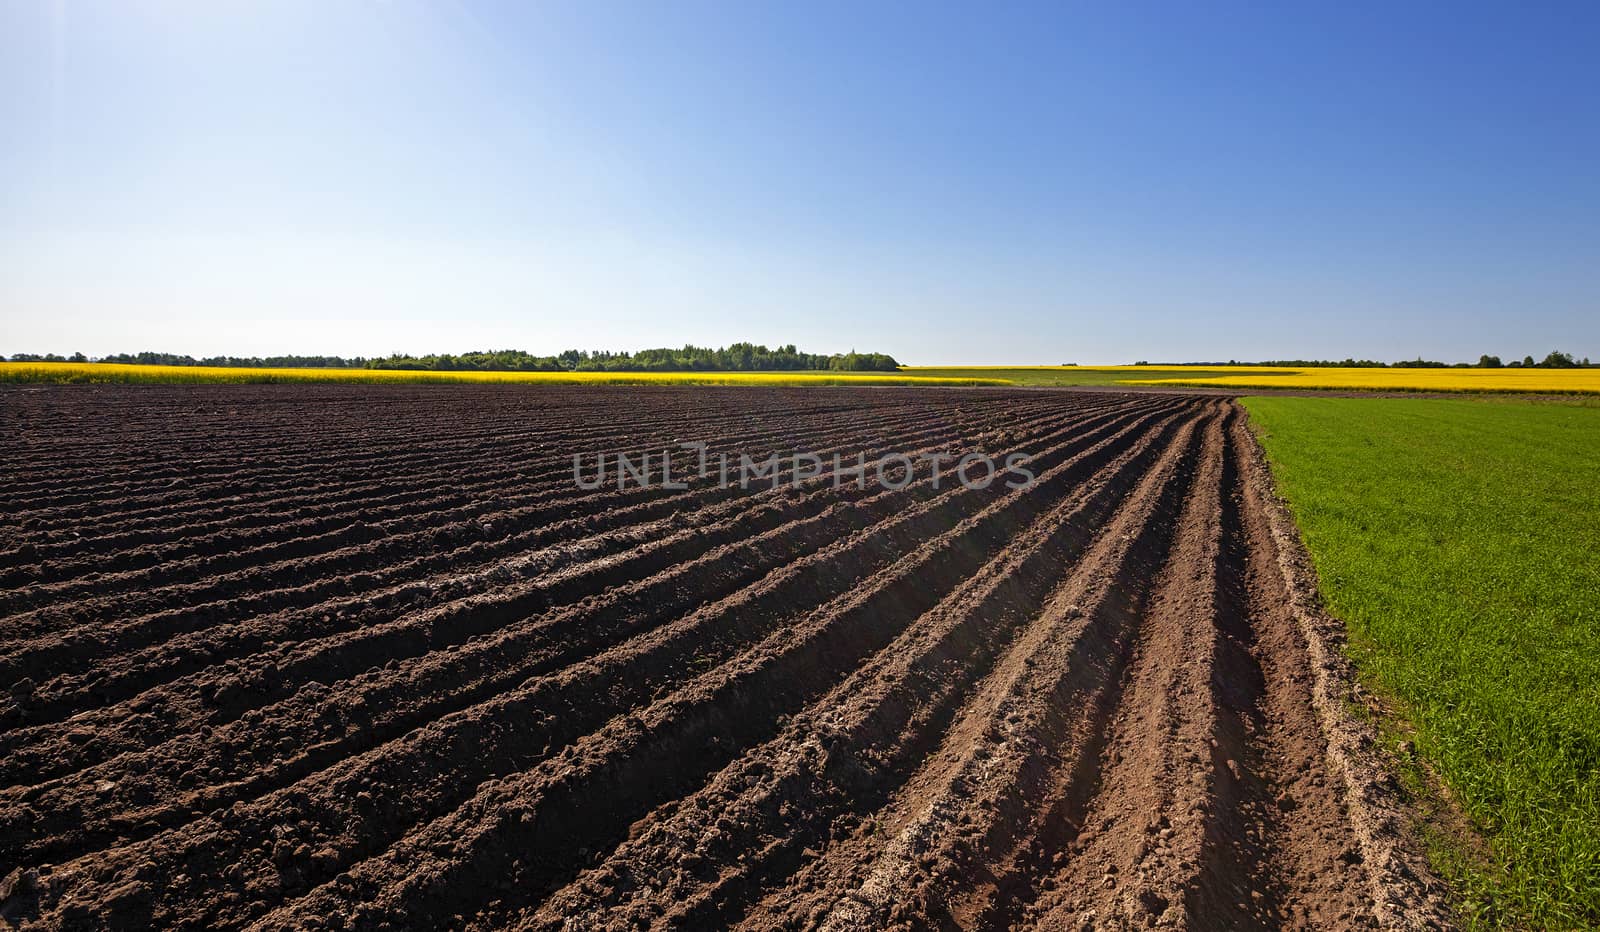   plowed land in the agricultural field. Next to which is growing green grass and blooming canola.